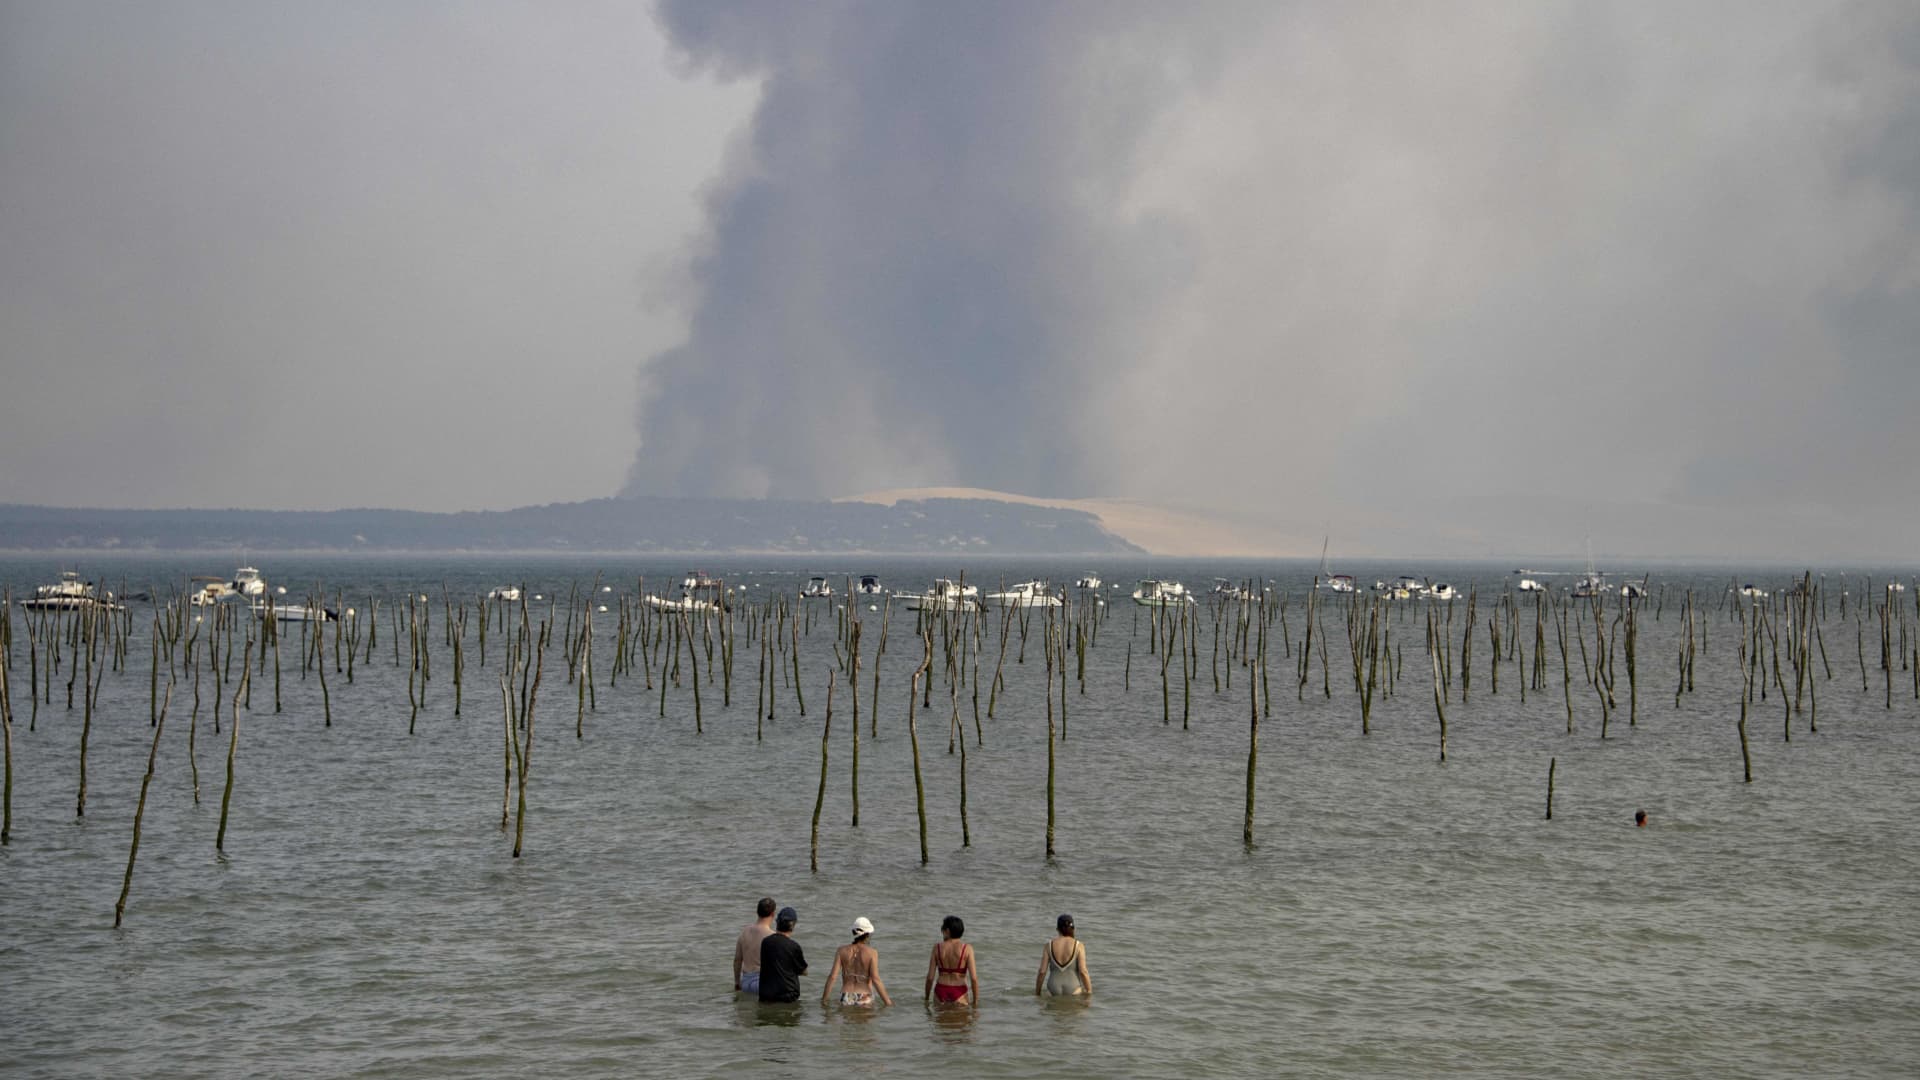 Tourists look at the plume of dark smoke over the Dune of Pilat from Cap Ferret due to a wildfire in a forest near La Teste, southwestern France.